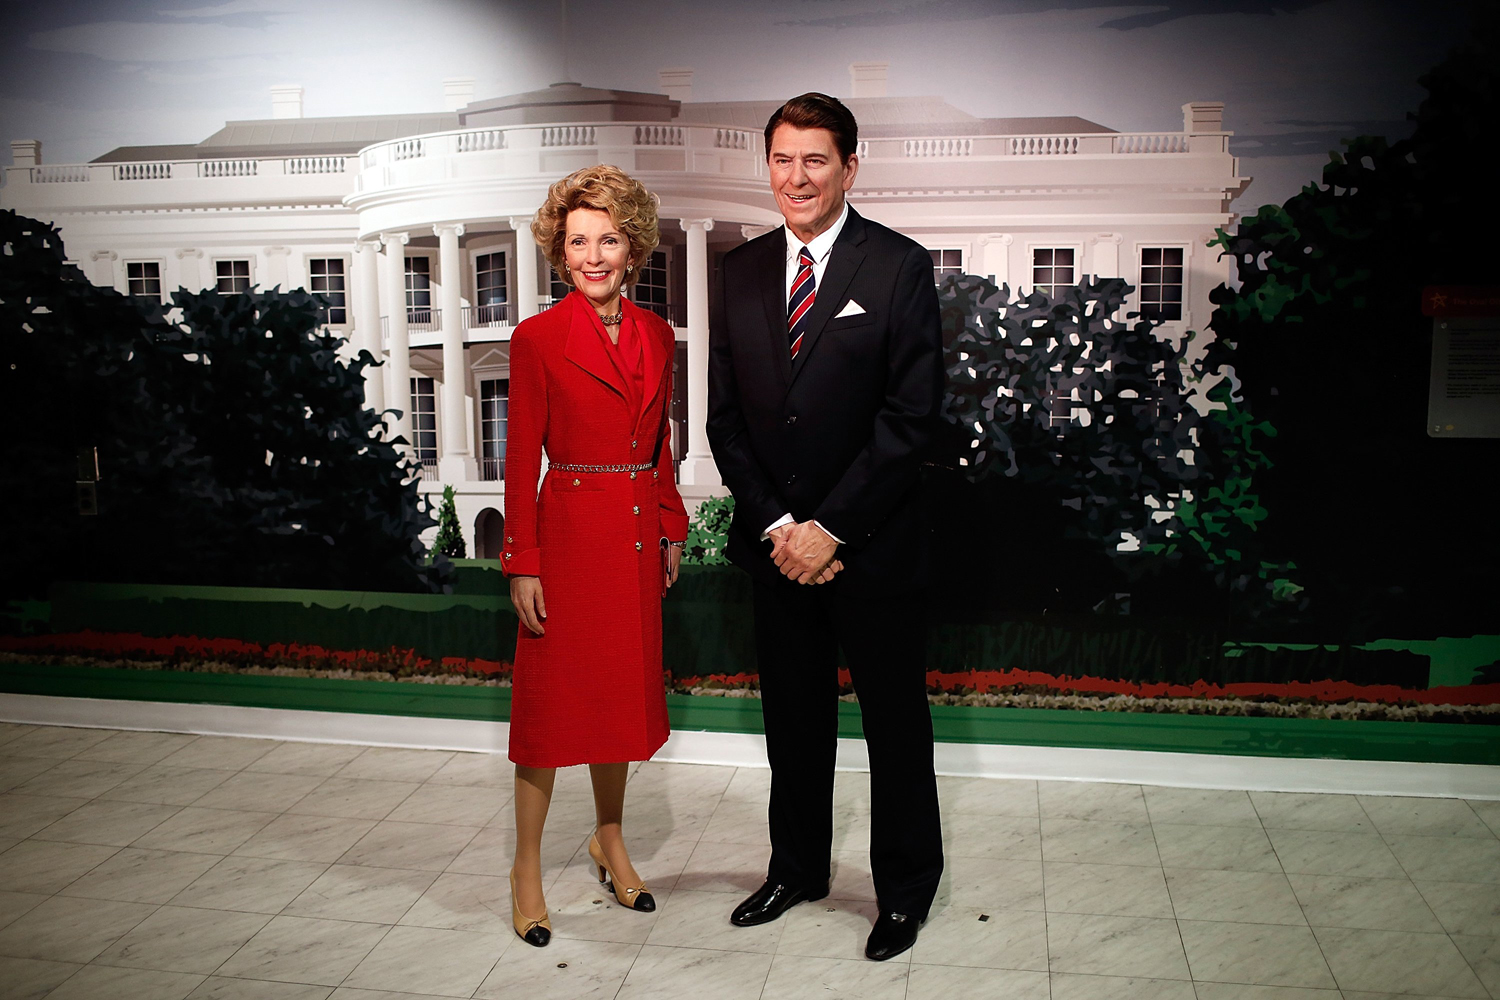 Wax Figure Of Nancy Reagan Unveiled At Madame Tussauds In Washington, D.C.